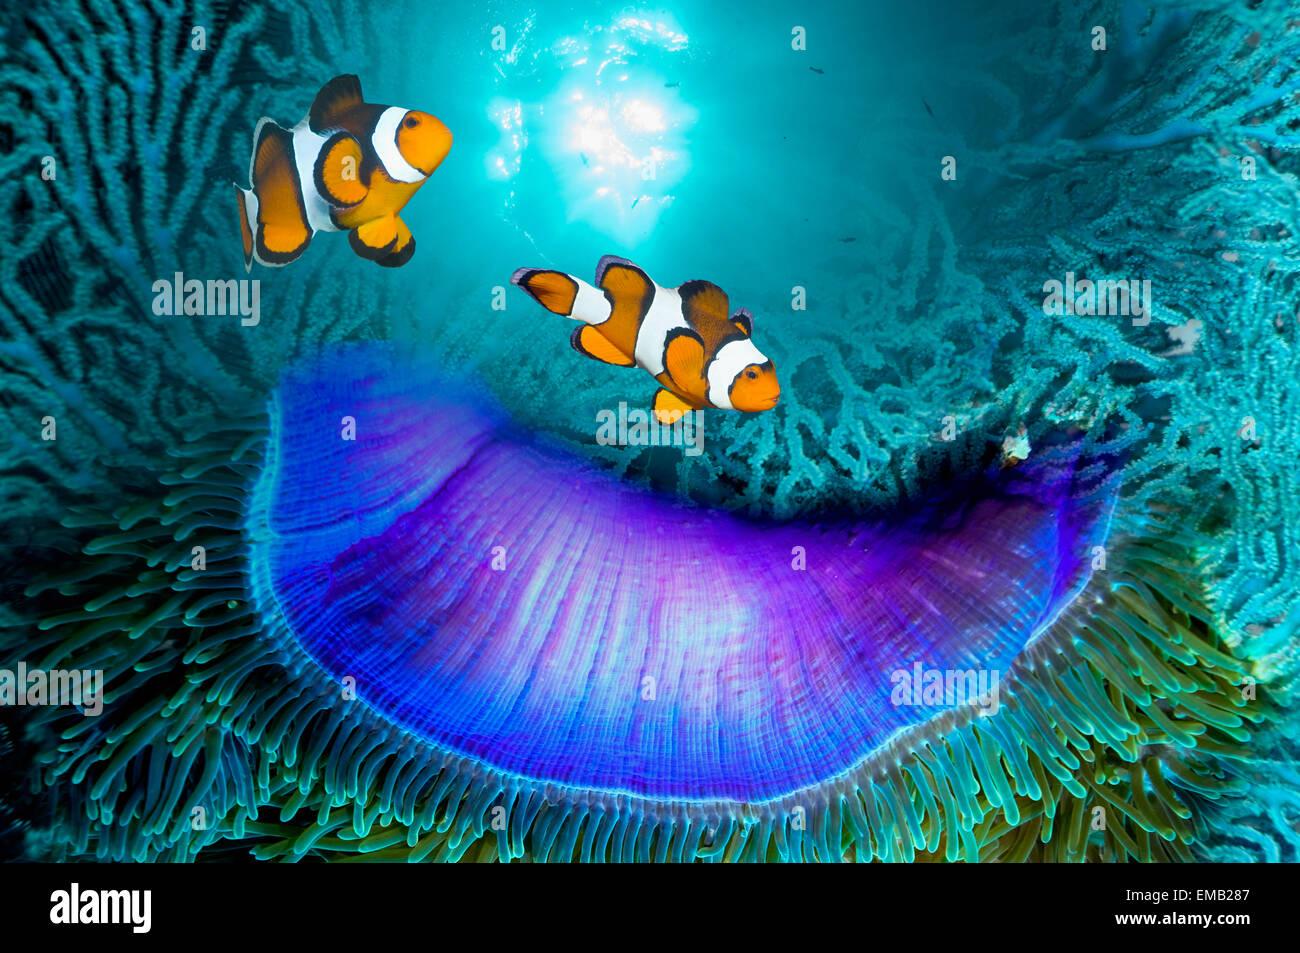 Montage of Clown anemonefish with corals. Stock Photo